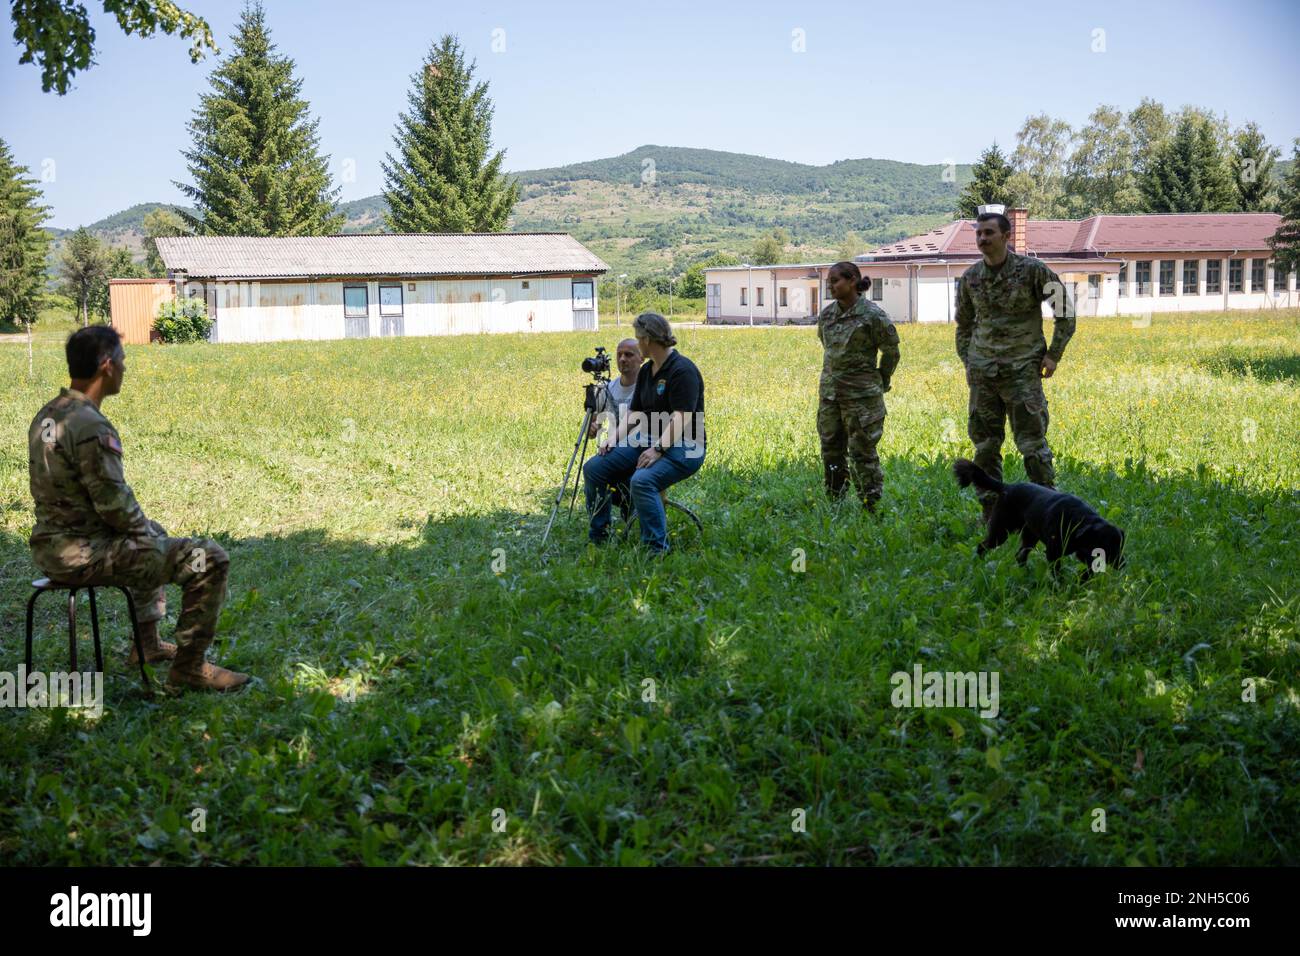 U.S. Army Maj. Kritis Dasgupta (left), a field surgeon with the Maryland Medical Detachment, is interviewed by NATO HQ Sarajevo at Kasarna Manjaca, Dobrnja, Bosnia and Herzegovina on July 17, 2022. Guard members assigned to the State Medical Detachment and 1-169th Aviation Regiment, Maryland Army National Guard, trained alongside active duty Soldiers from the 1st Squadron, 91st Cavalry Regiment, 173rd Airborne Brigade, 12th Combat Aviation Brigade, and the Armed Forces of Bosnia and Herzegovina soldiers in tactics, aviation, medical, and non-commissioned officer development. The Maryland Natio Stock Photo